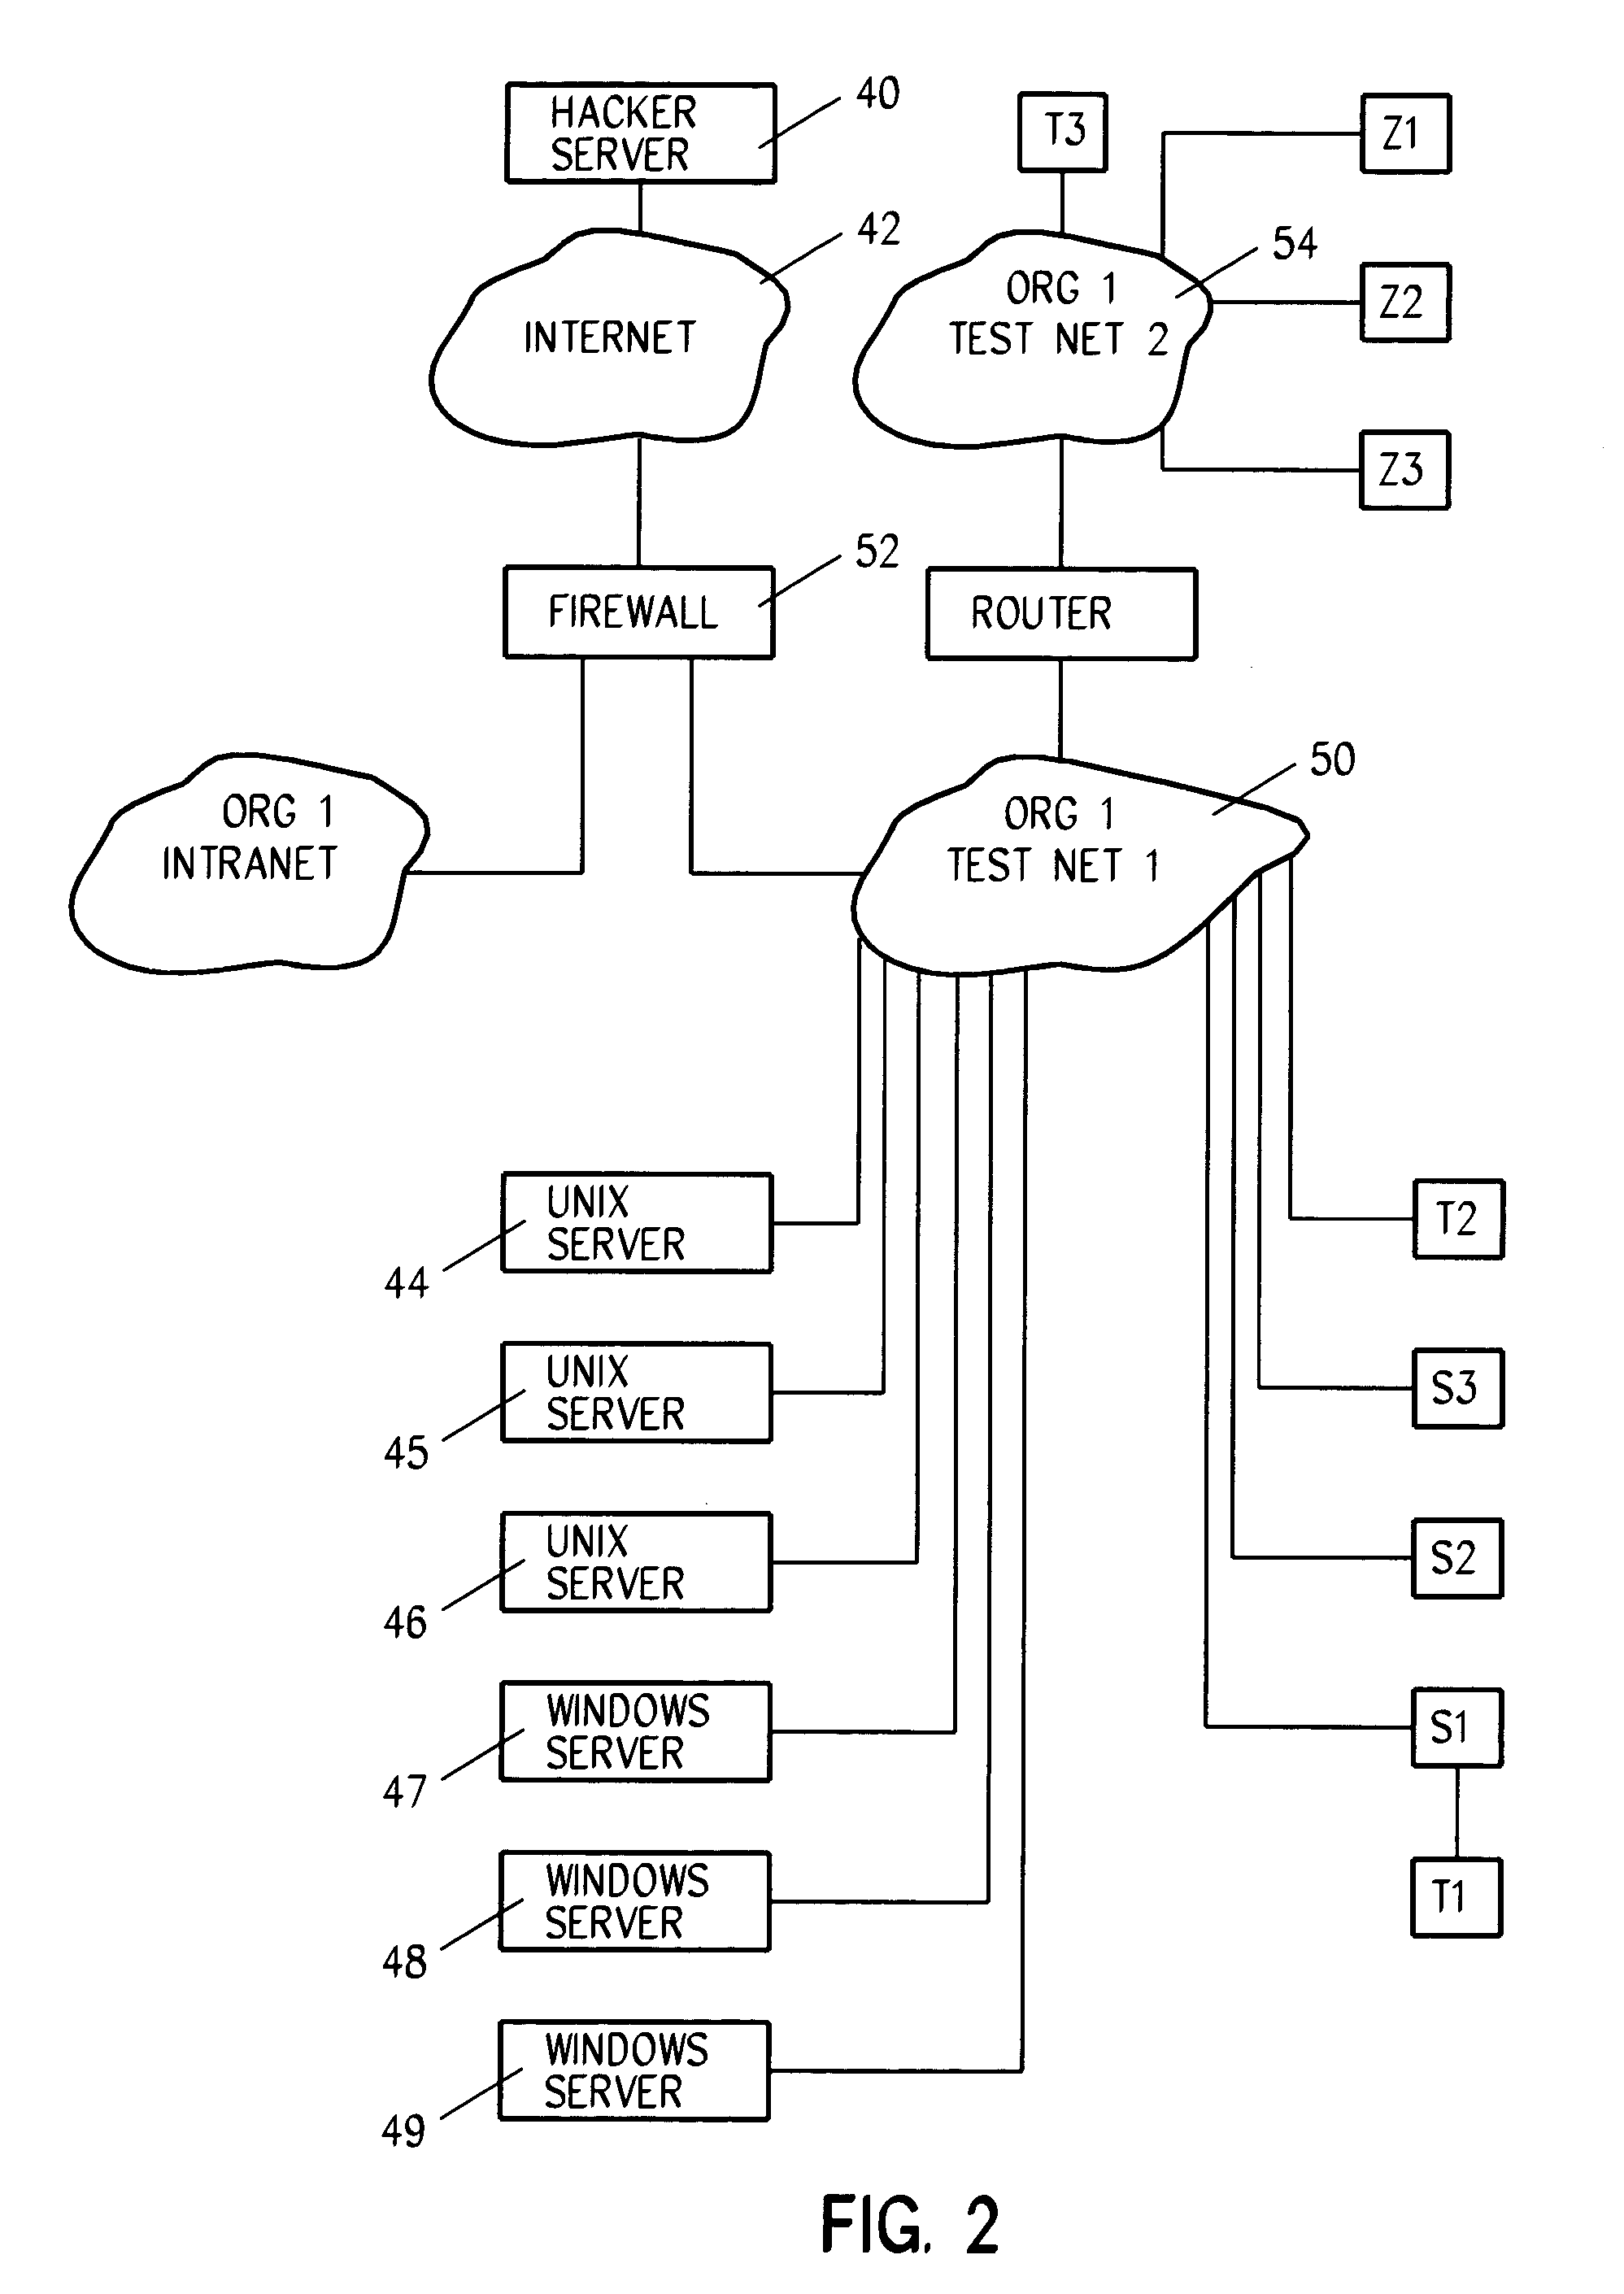 System and method for the detection of and reaction to denial of service attacks